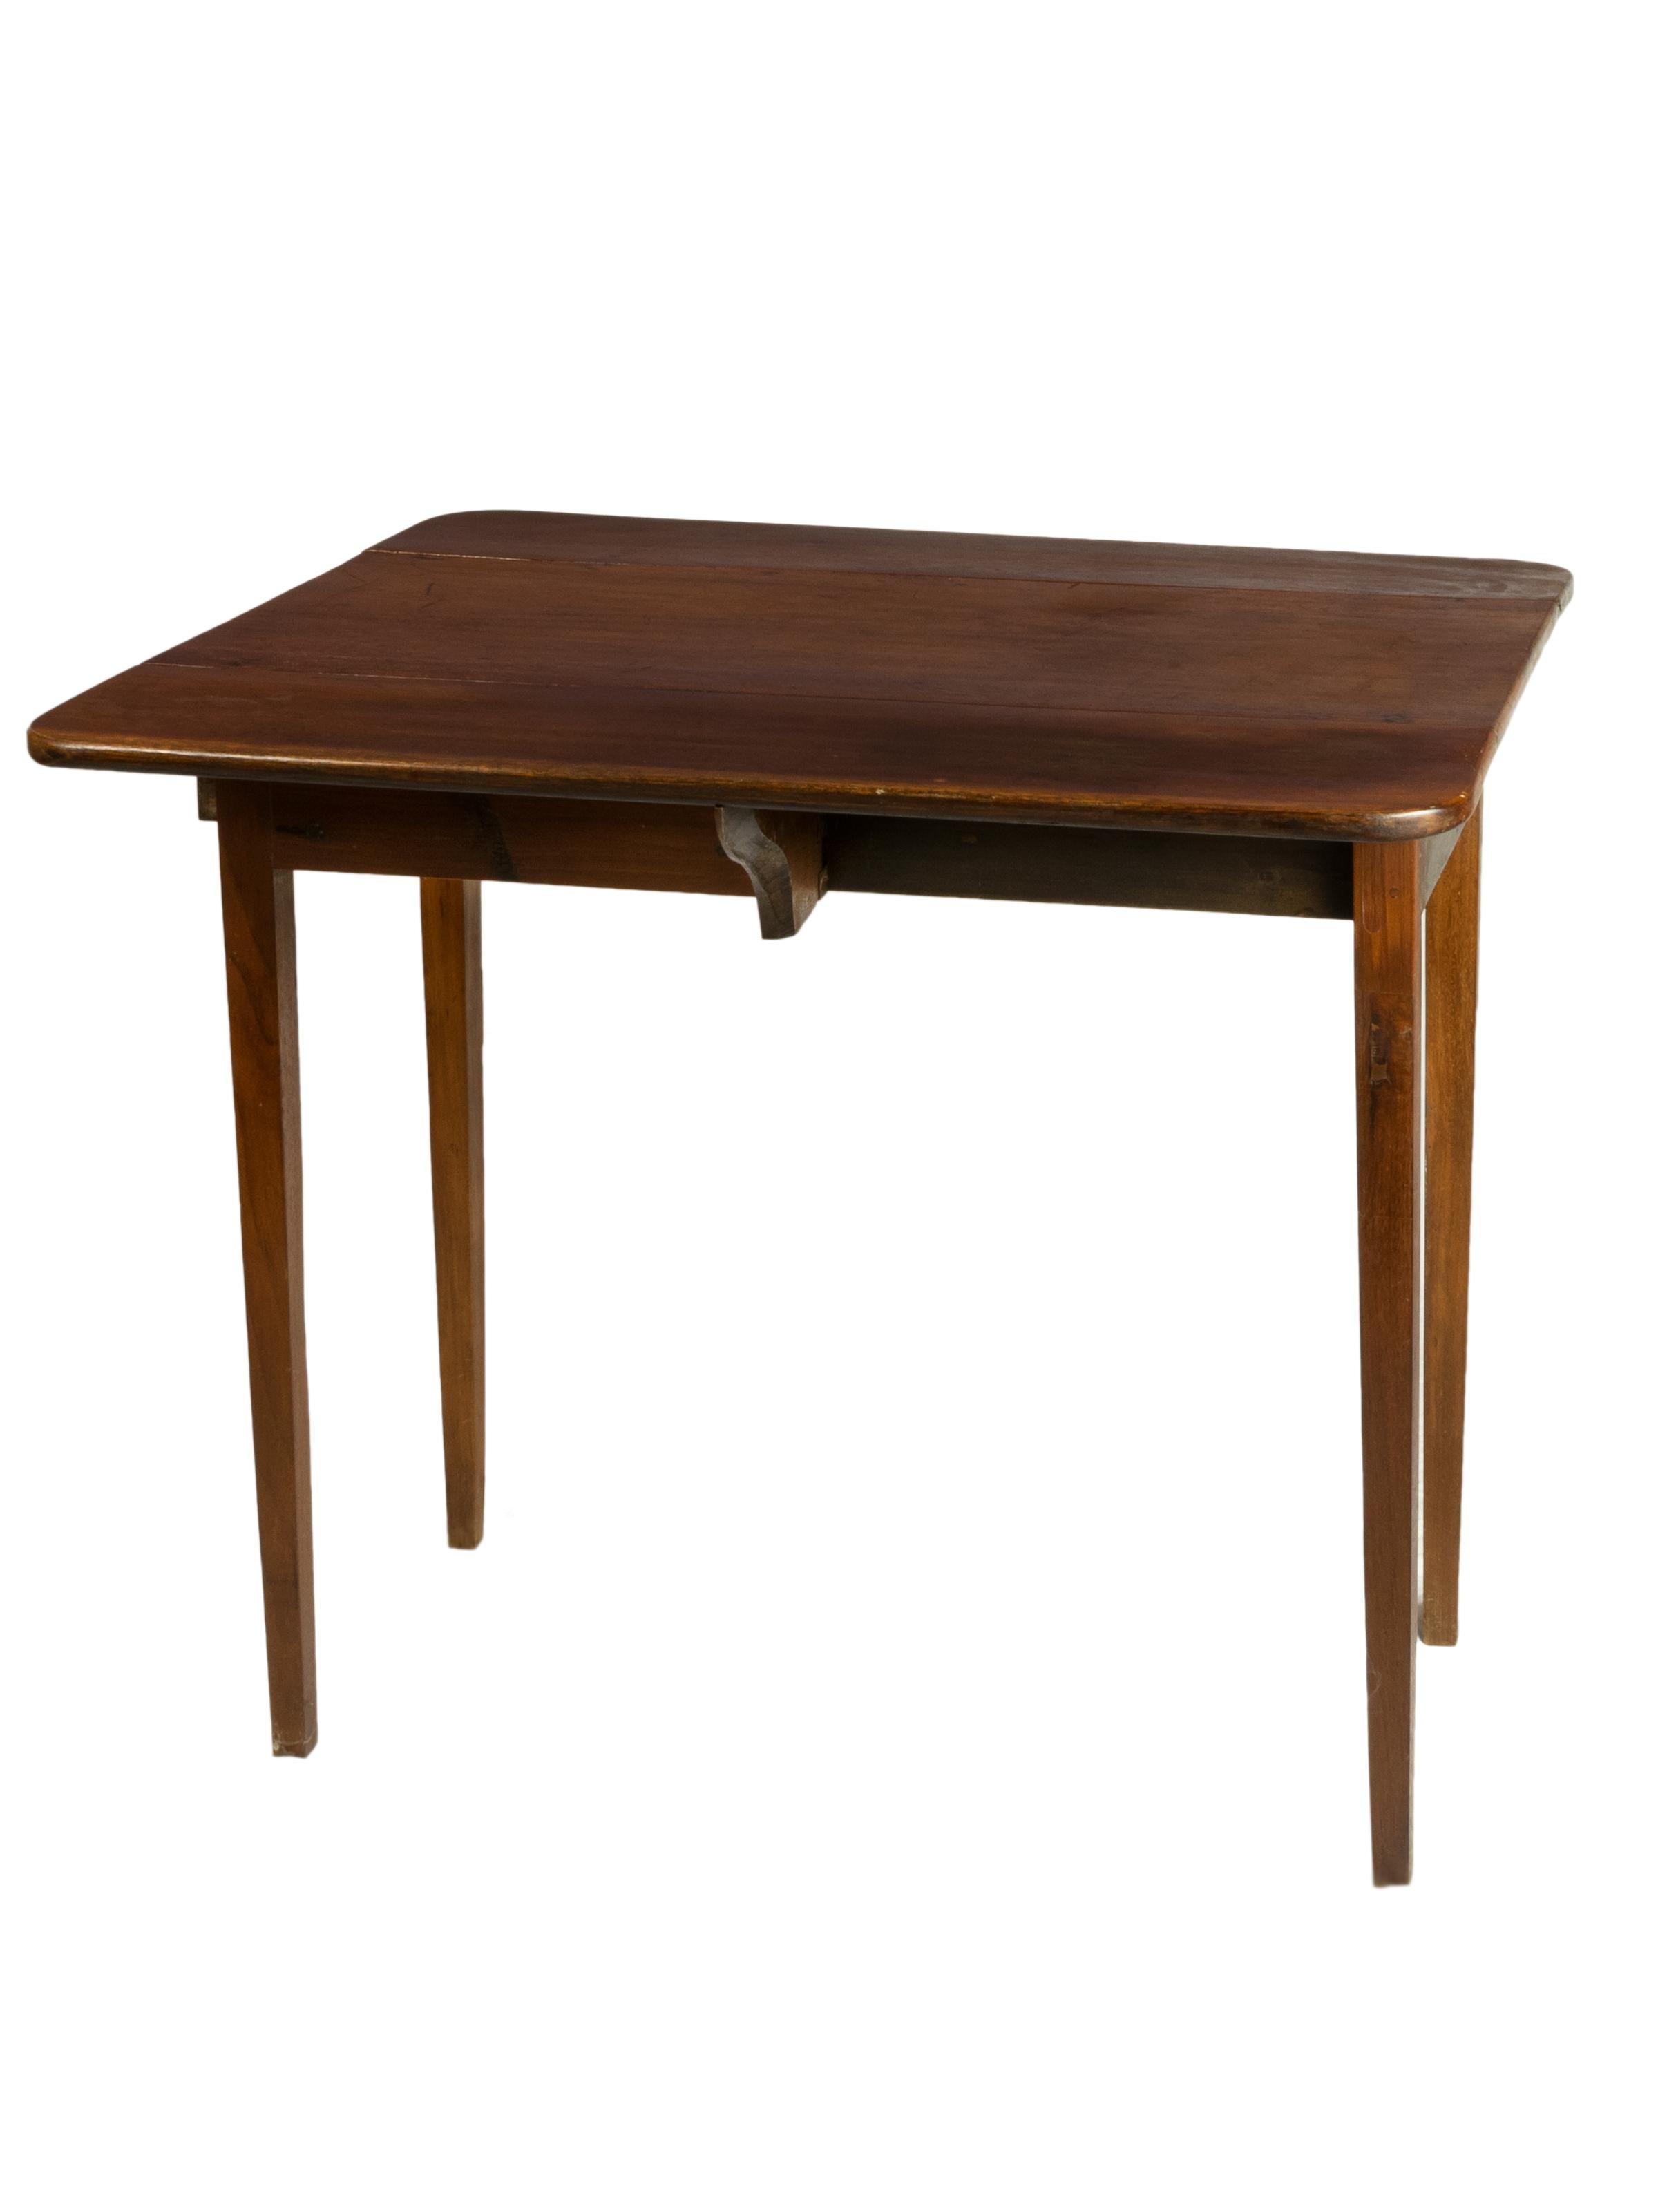 Wood 19th Century Pembroke Flap Table, Portugal For Sale